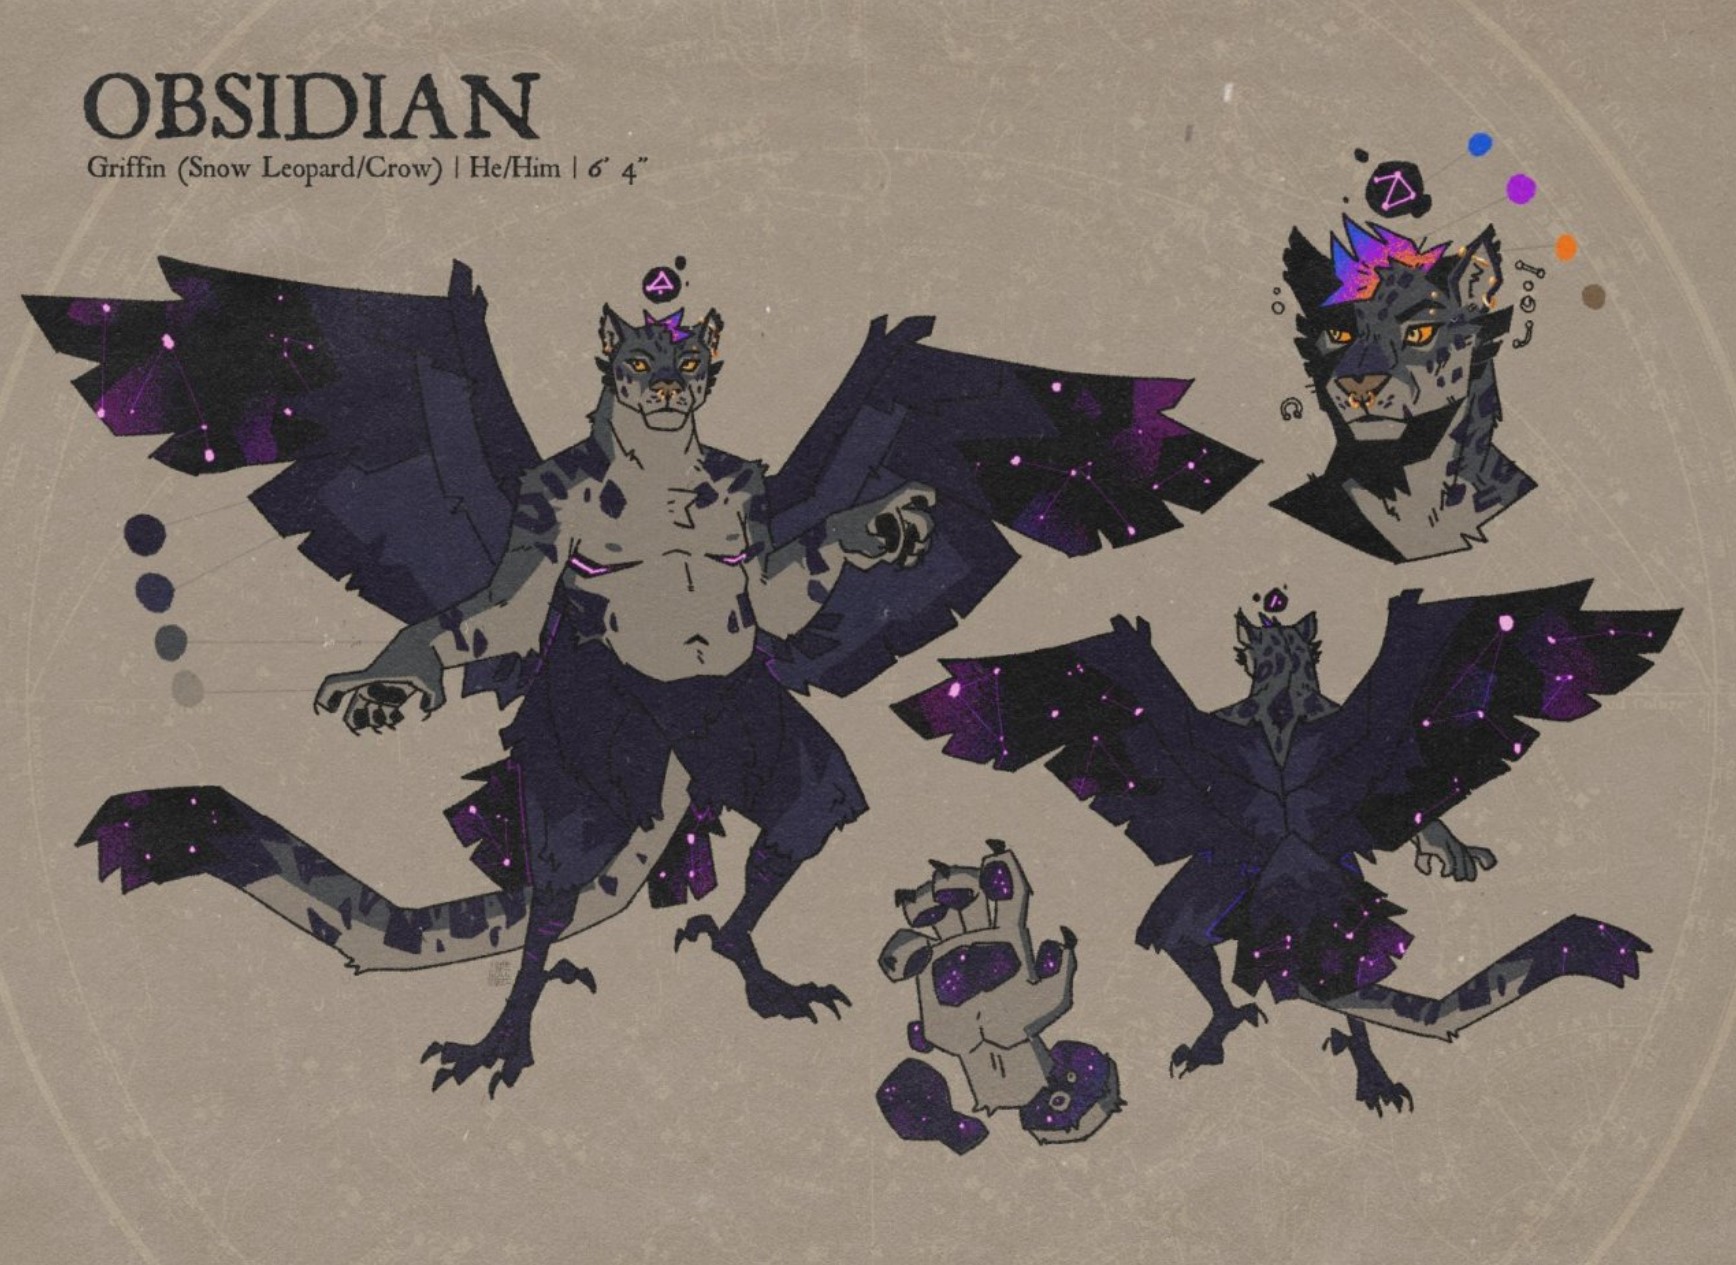 Character reference sheet of a winged, snow leopard and crow hybrid creature.The text reads "Obsidian, Griffin (Snow Leopard/Crow) | He/Him | 6 (feet) 4 (inches)". From left to right, there is a front full view of the characters with wings open, then a close up of his paw shimmering like a night sky on the pawpads and flesh, then a smaller back view of the character, and finally a close up of his head with small visuals of his various piercings. A blob with a constellation floating above his head.